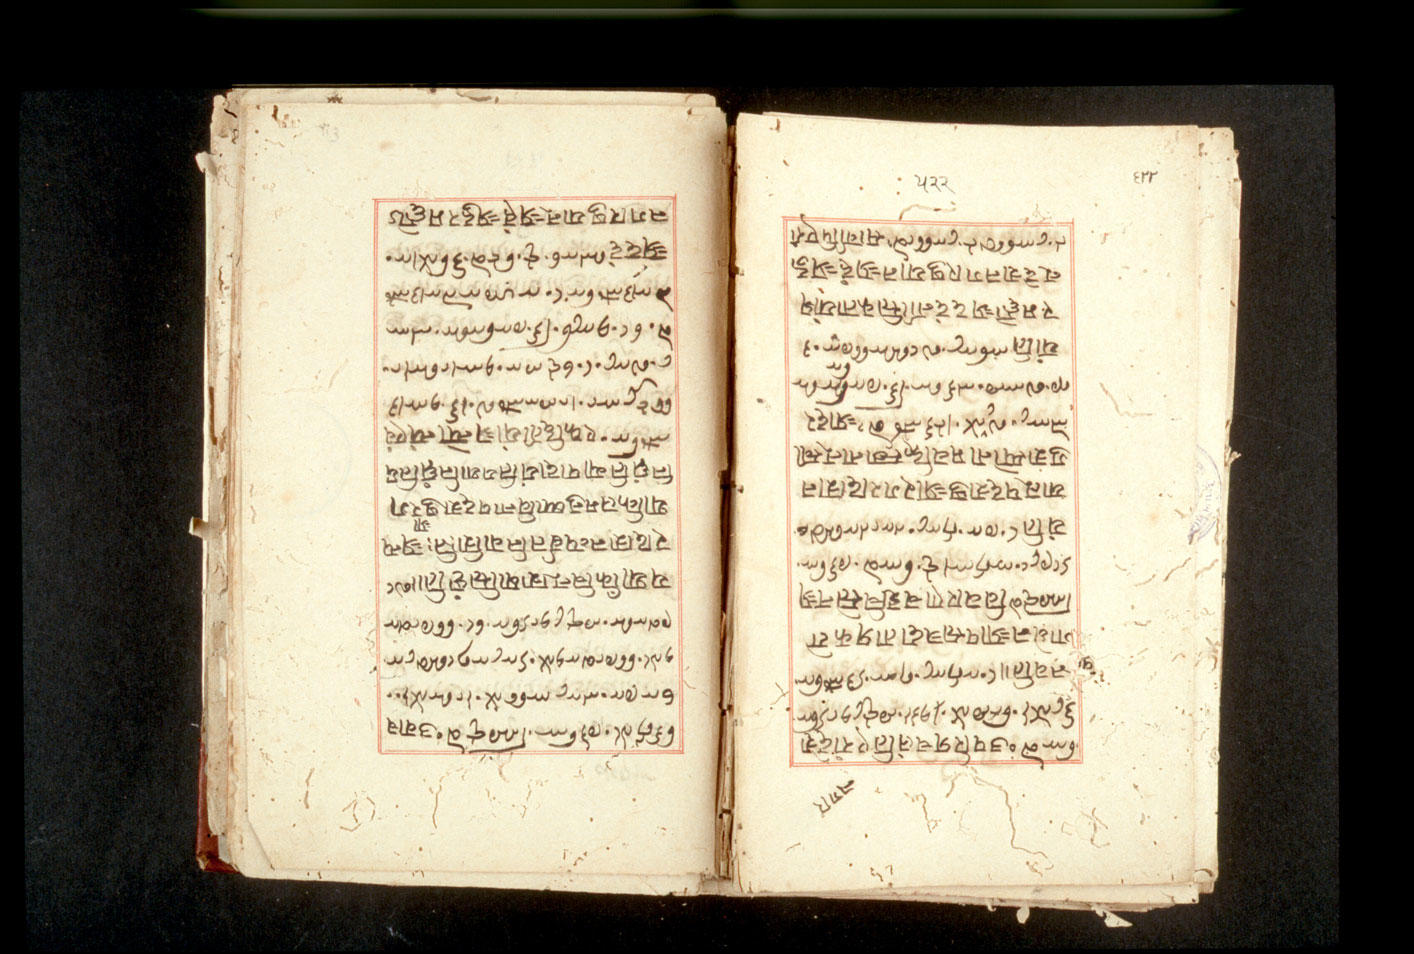 Folios 522v (right) and 523r (left)